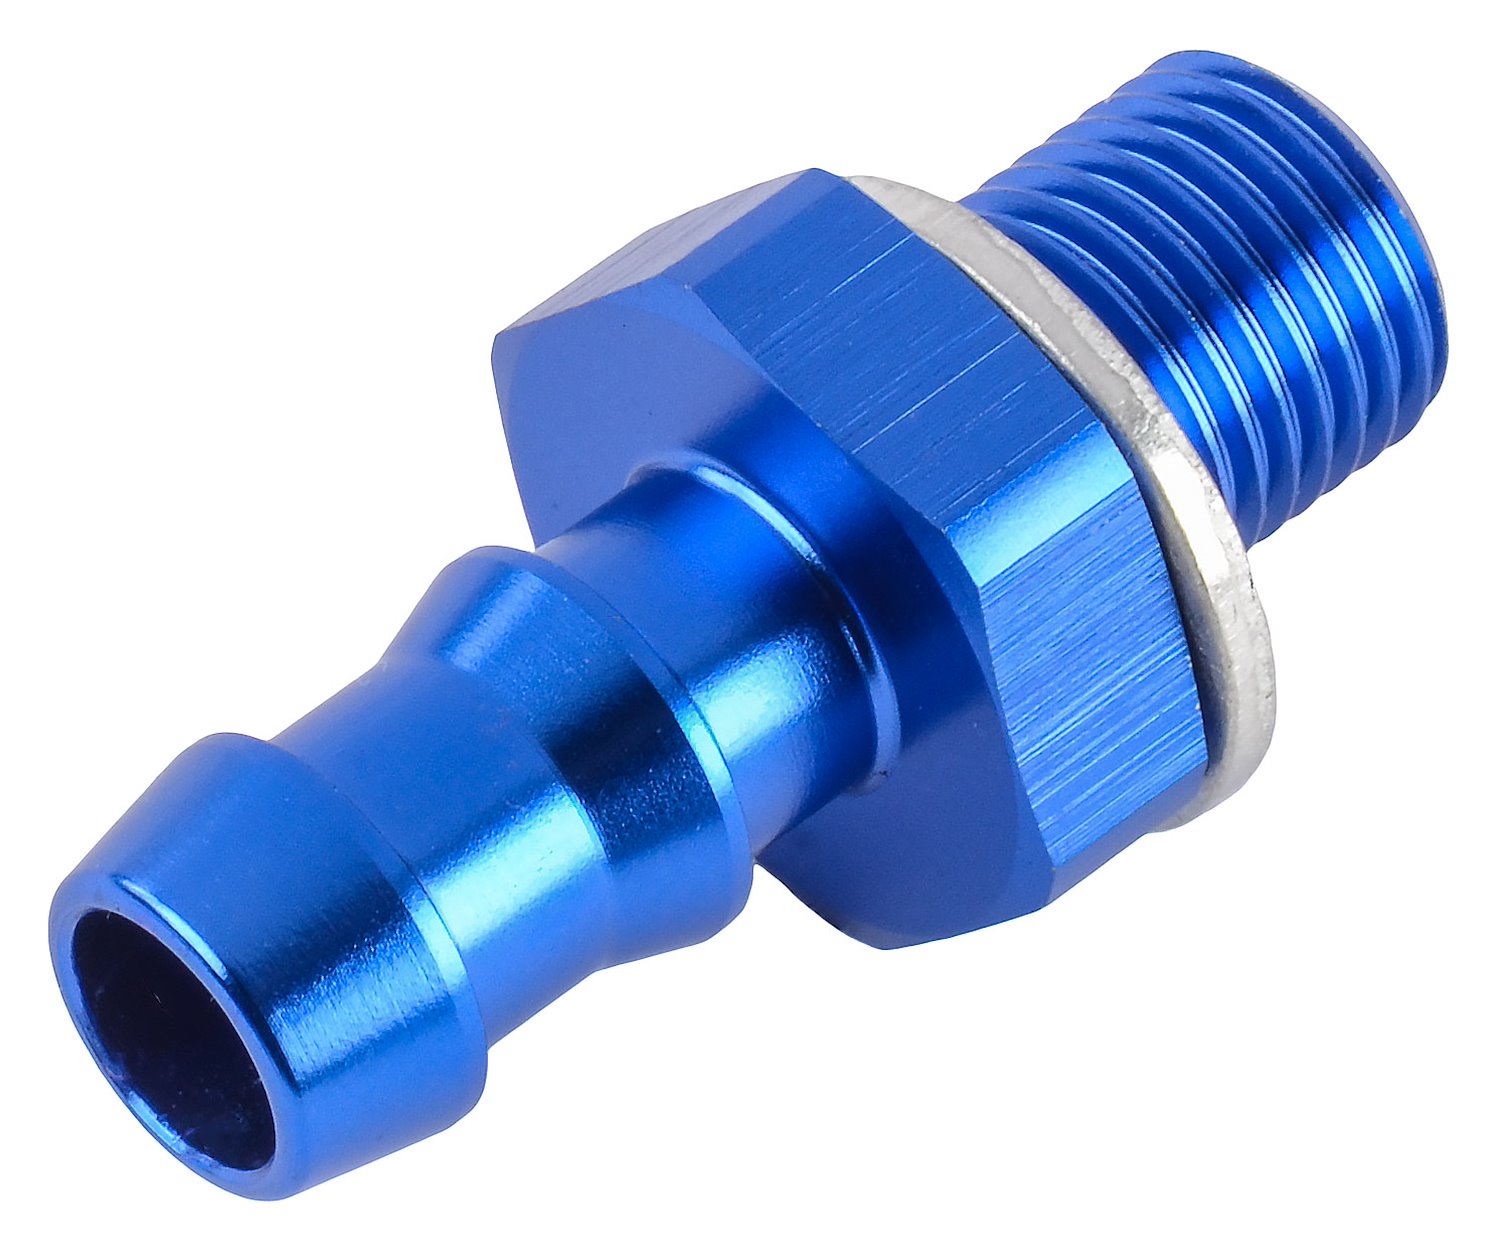 Hose Barb Adapter 10mm x 1.0 Male Straight to 5/16" Hose